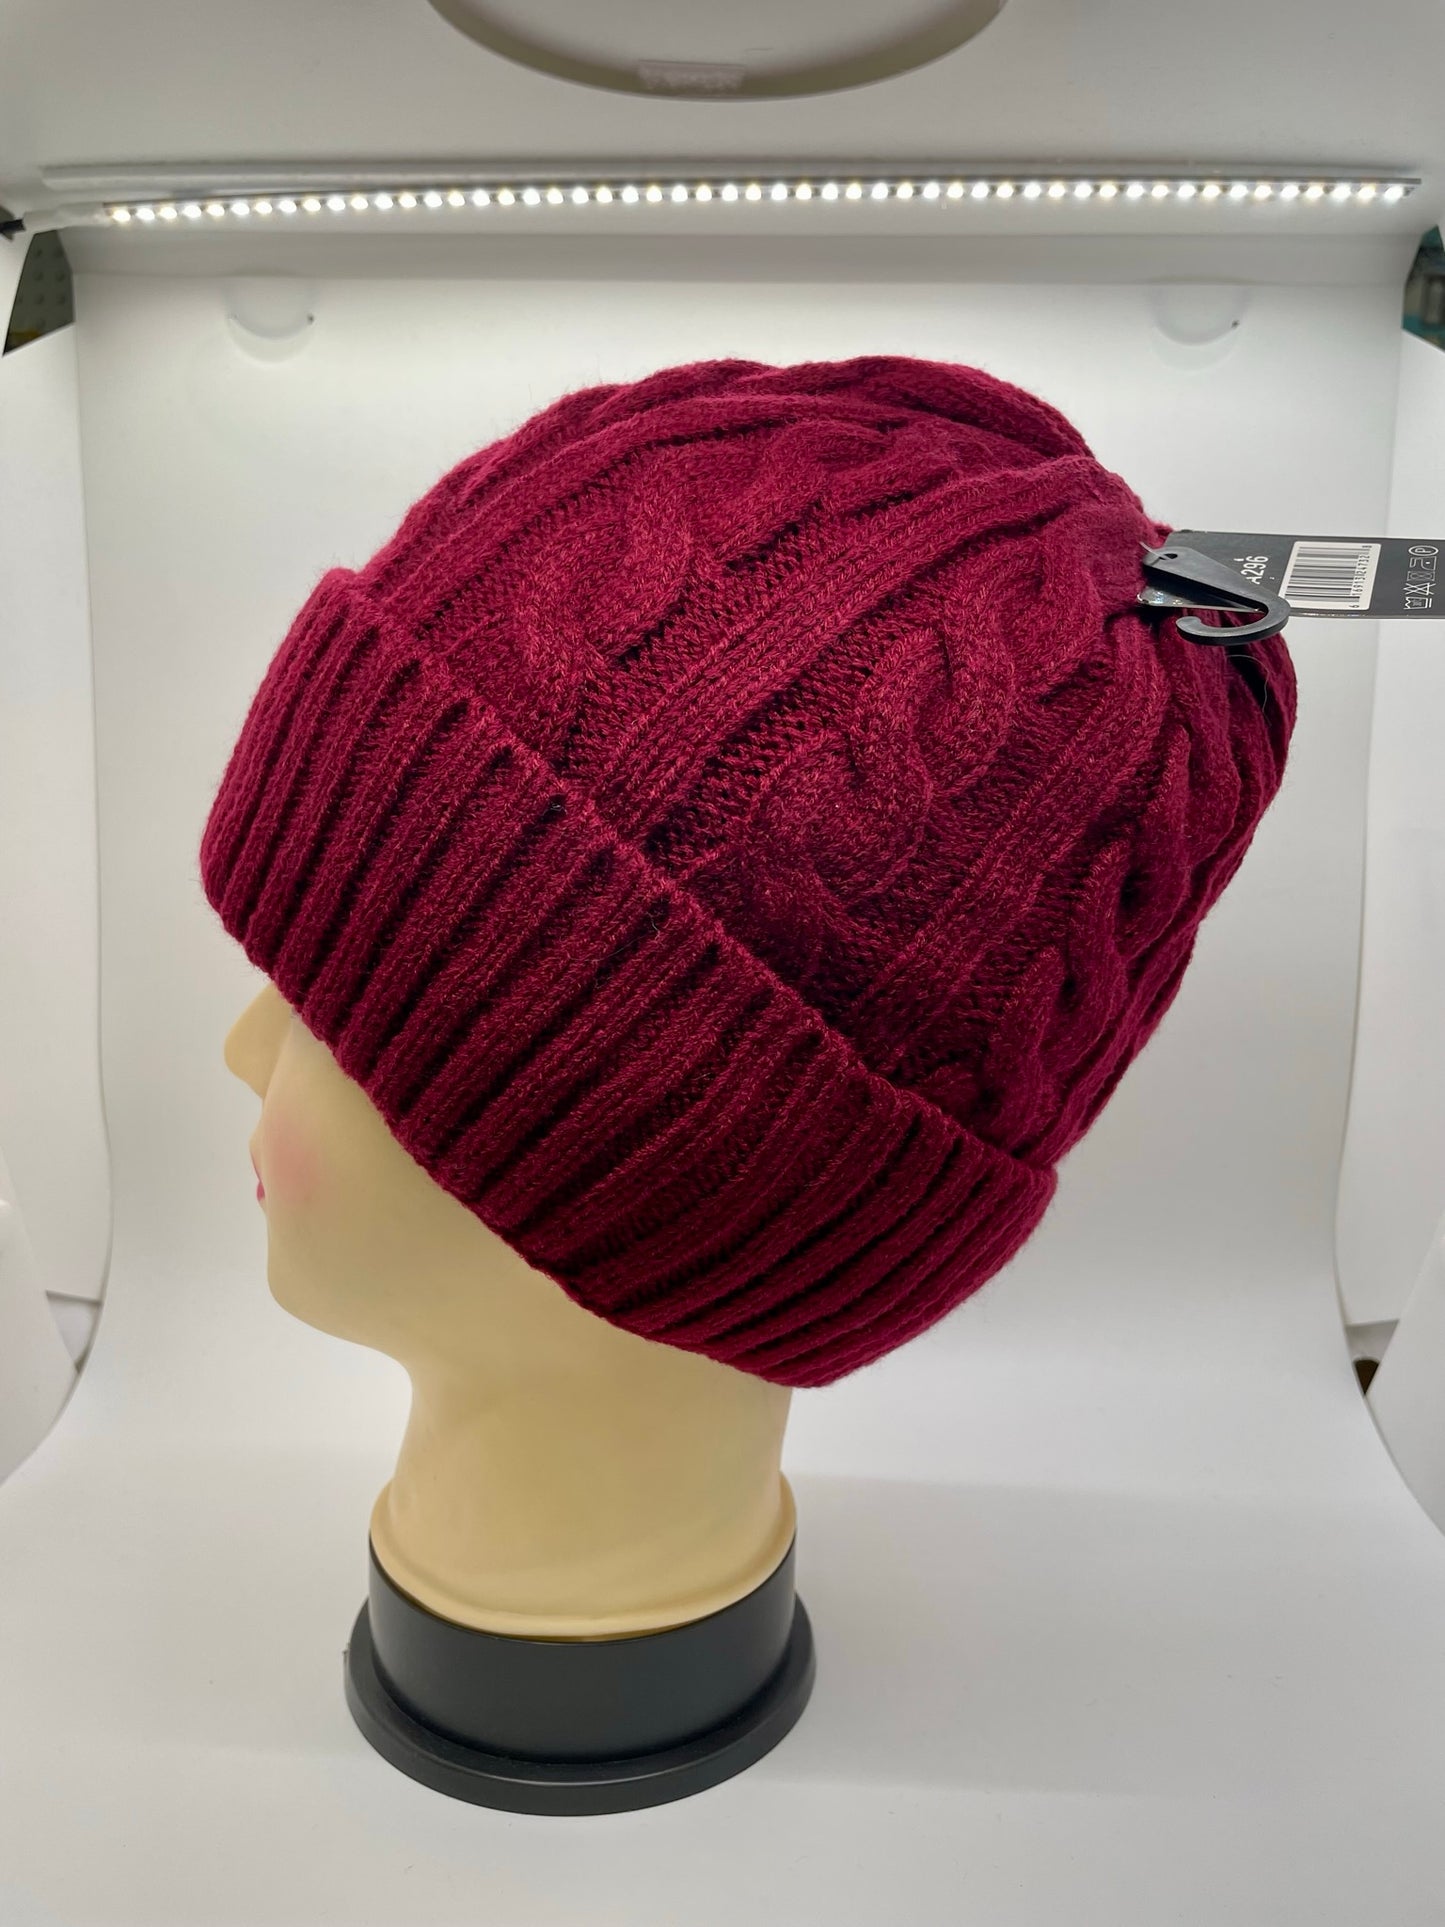 "Red knitted beanie with a cable knit pattern and a fringed edge"